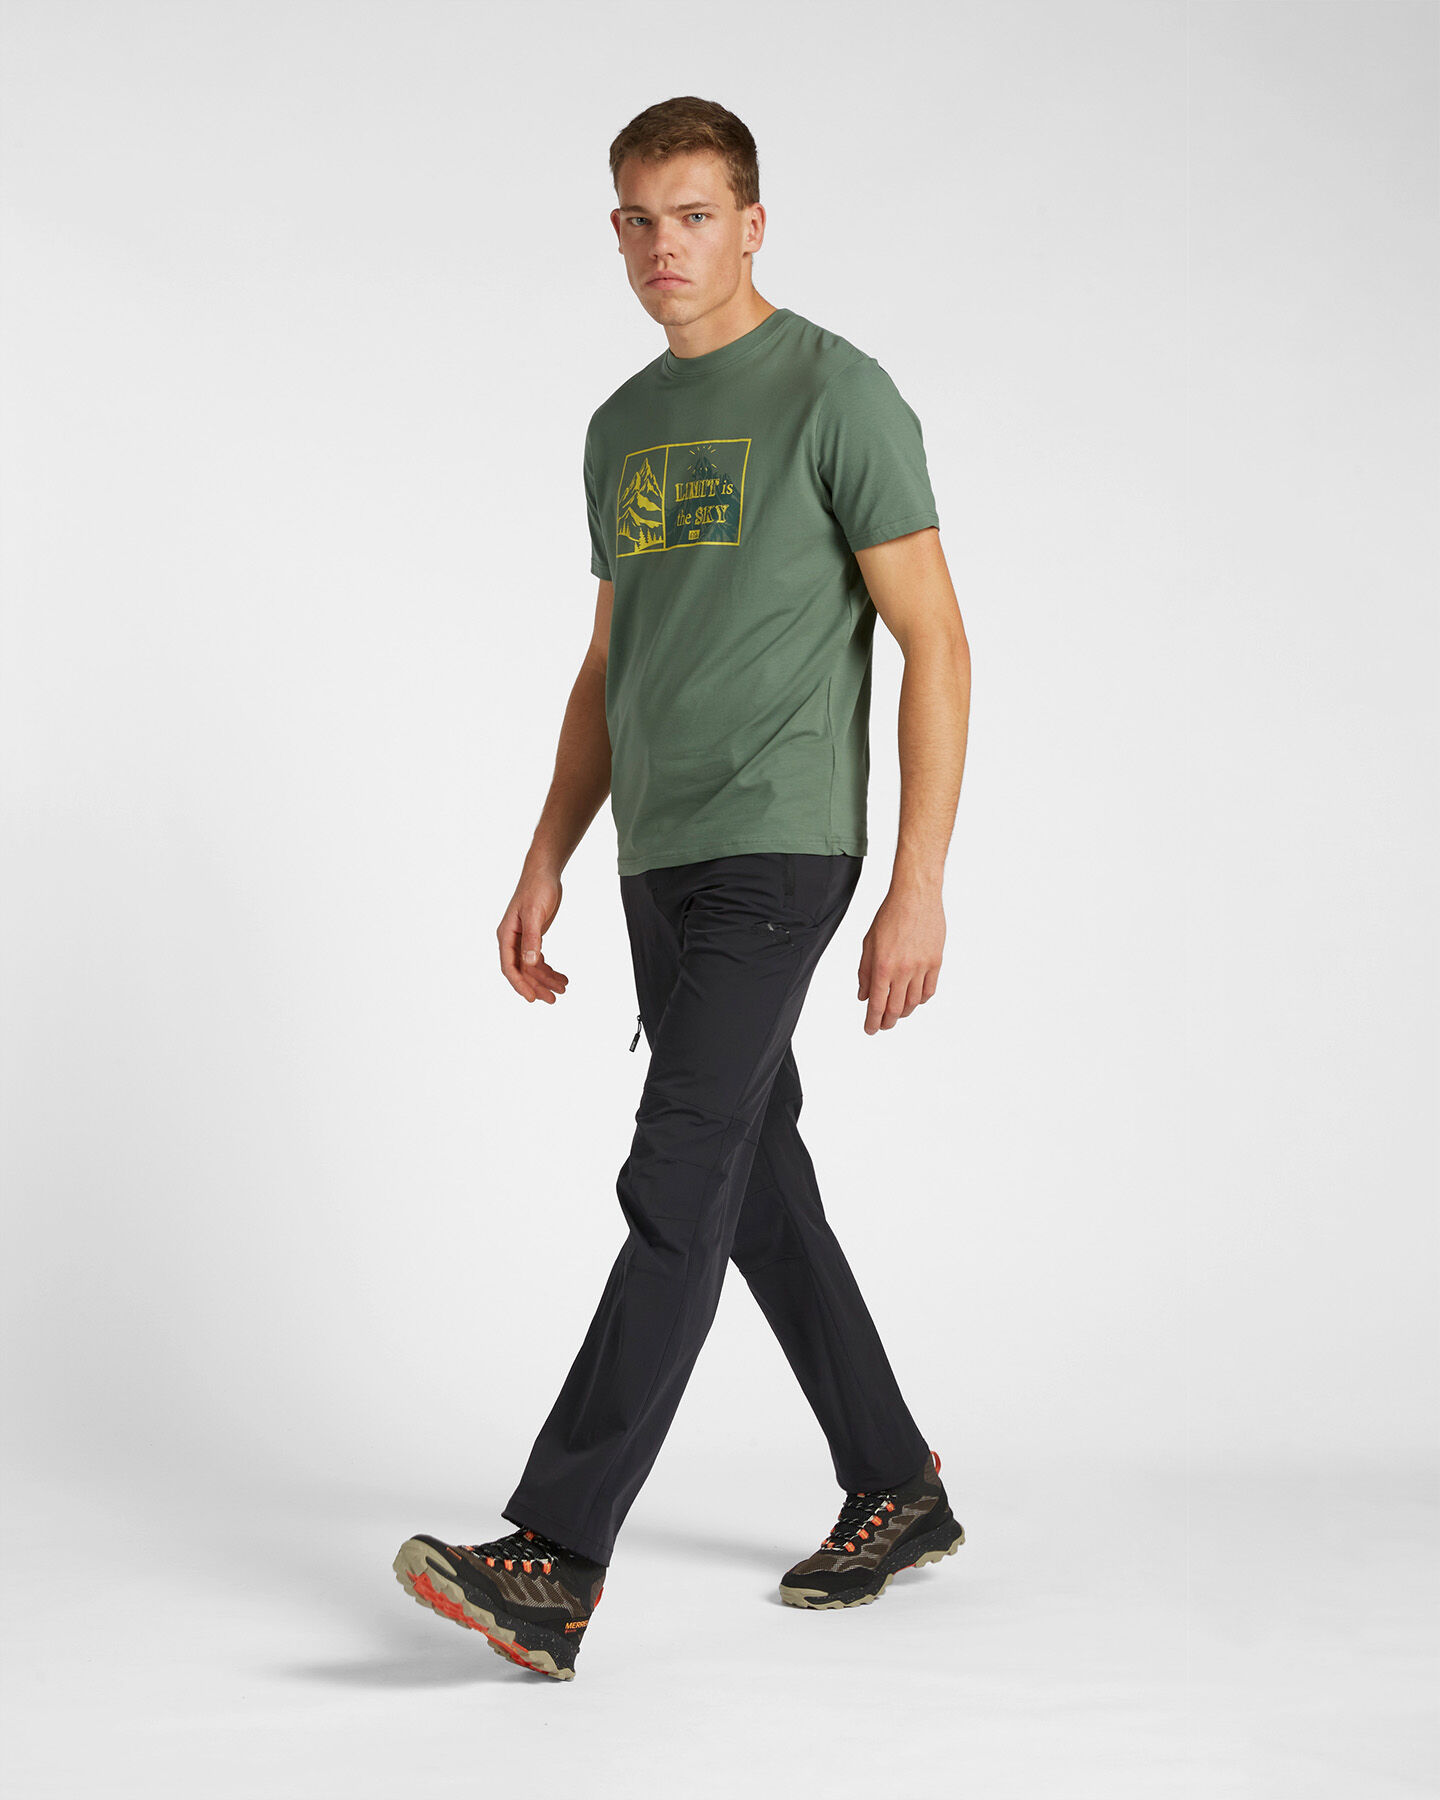  T-Shirt 8848 MOUNTAIN ESSENTIAL M S4120508|776/OTM05|S scatto 3